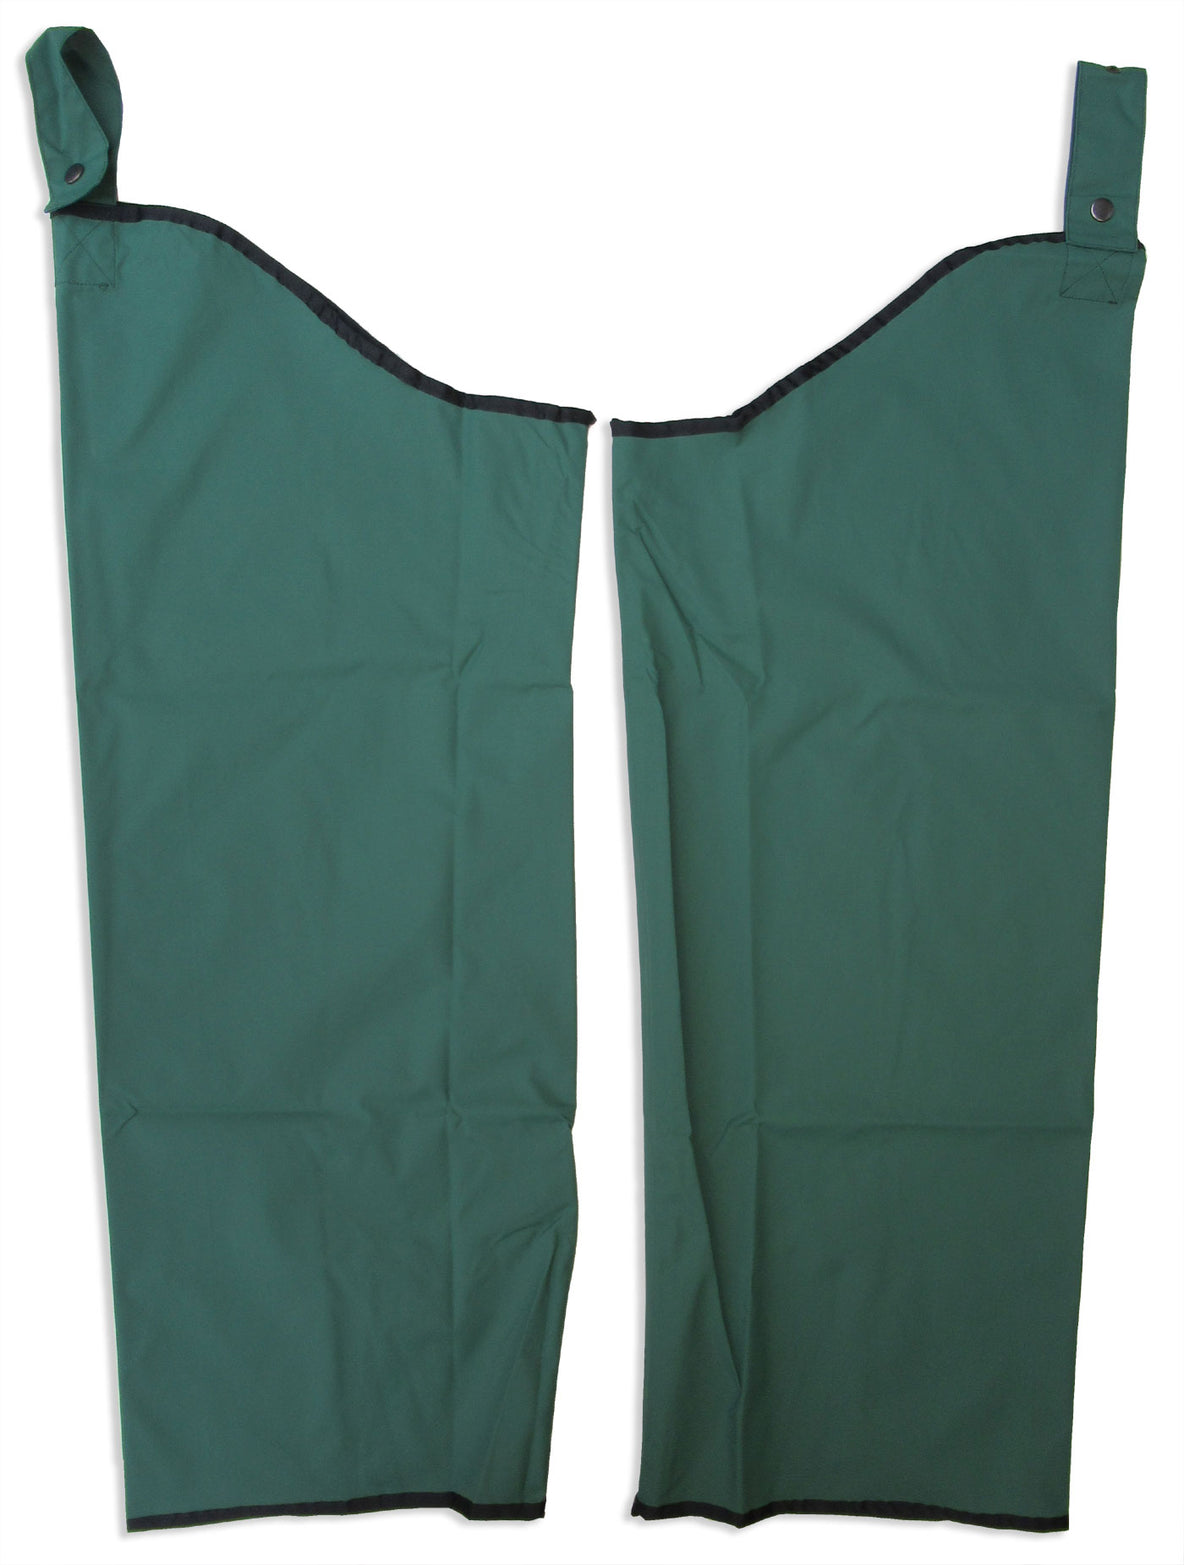 Quality waterproof pull on Leggings from GDT, a Farmer&